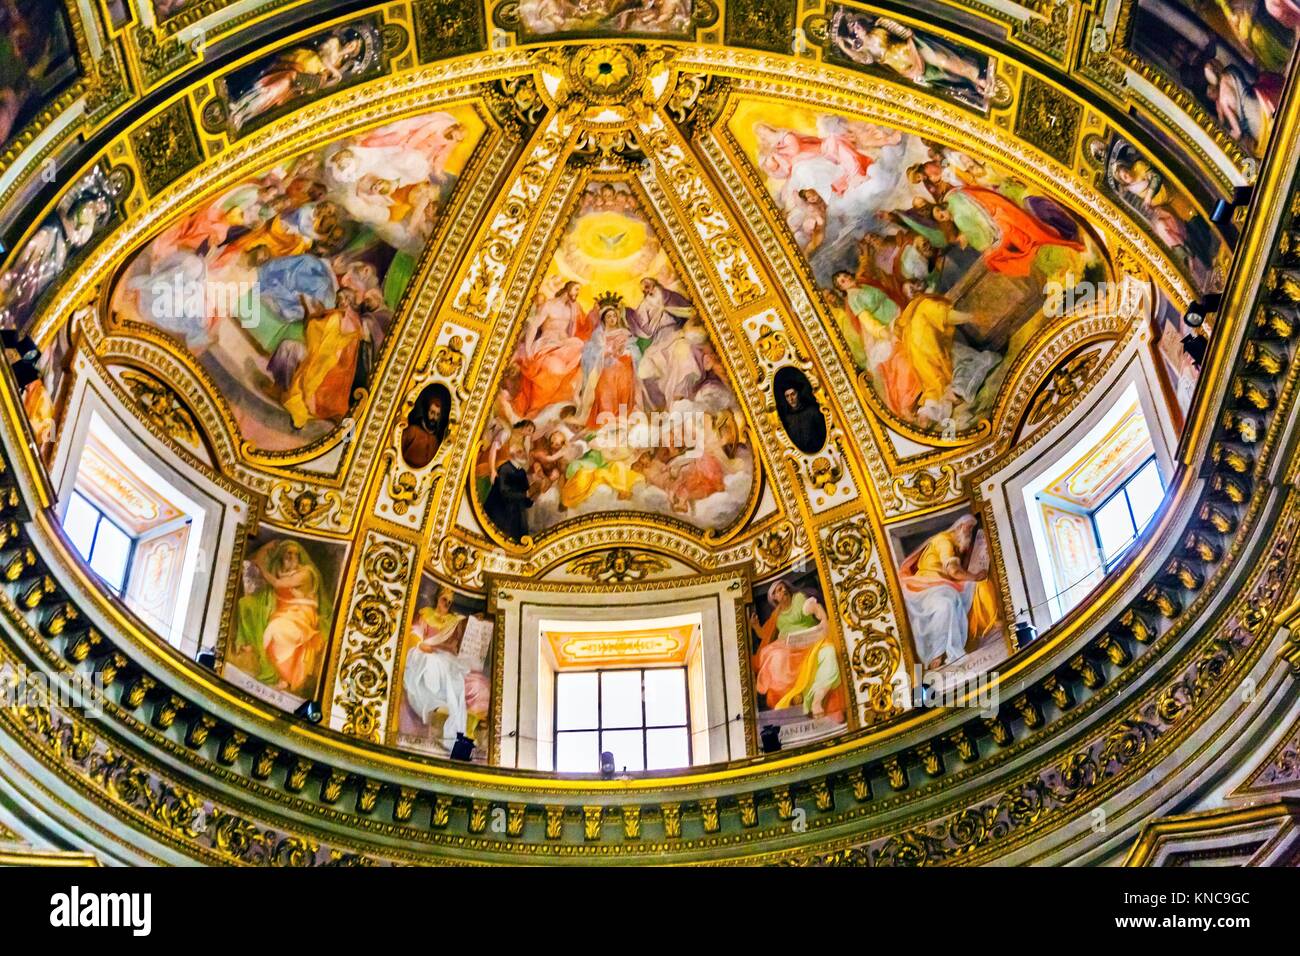 Dome Frescoes Chiesa San Marcello al Corso Altar Dome Frescoes Basilica Church Rome Italy. Built in 309, rebuilt in 1500s after sack of Rome. Stock Photo